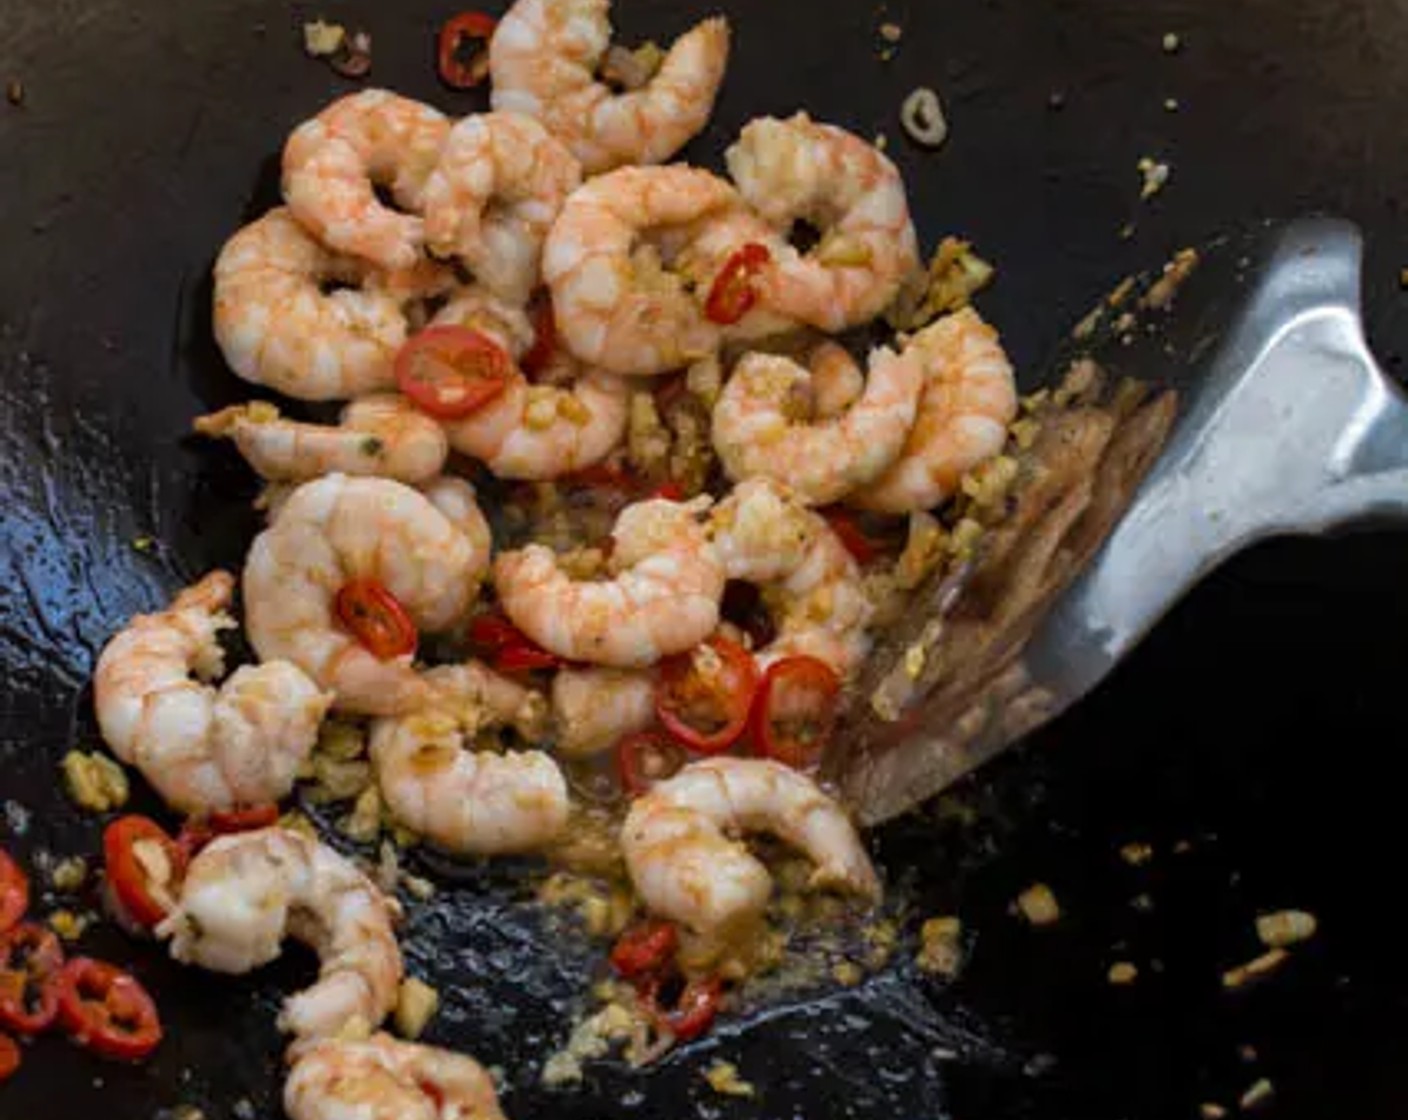 step 2 When the garlic and shallots start to turn slightly brown, add Red Chili Pepper (1) to the wok. Add Medium Shrimp (10), then stir-fry until slightly opaque.